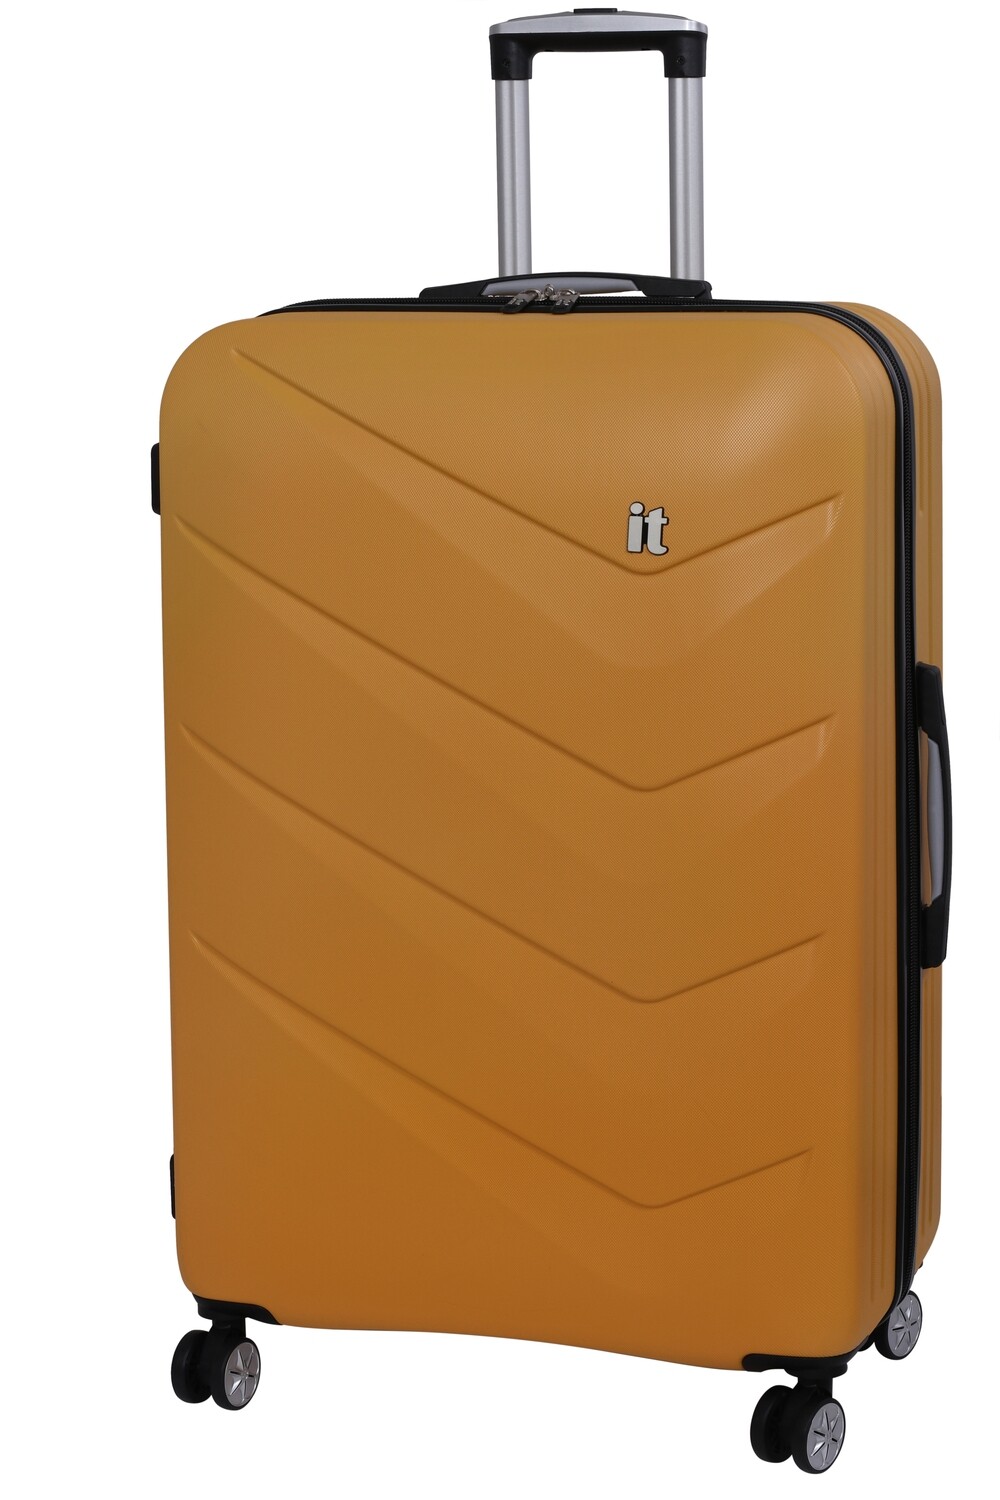 IT LUGGAGE CHEVRON 30" STRONG TROLLEY OLD GOLD